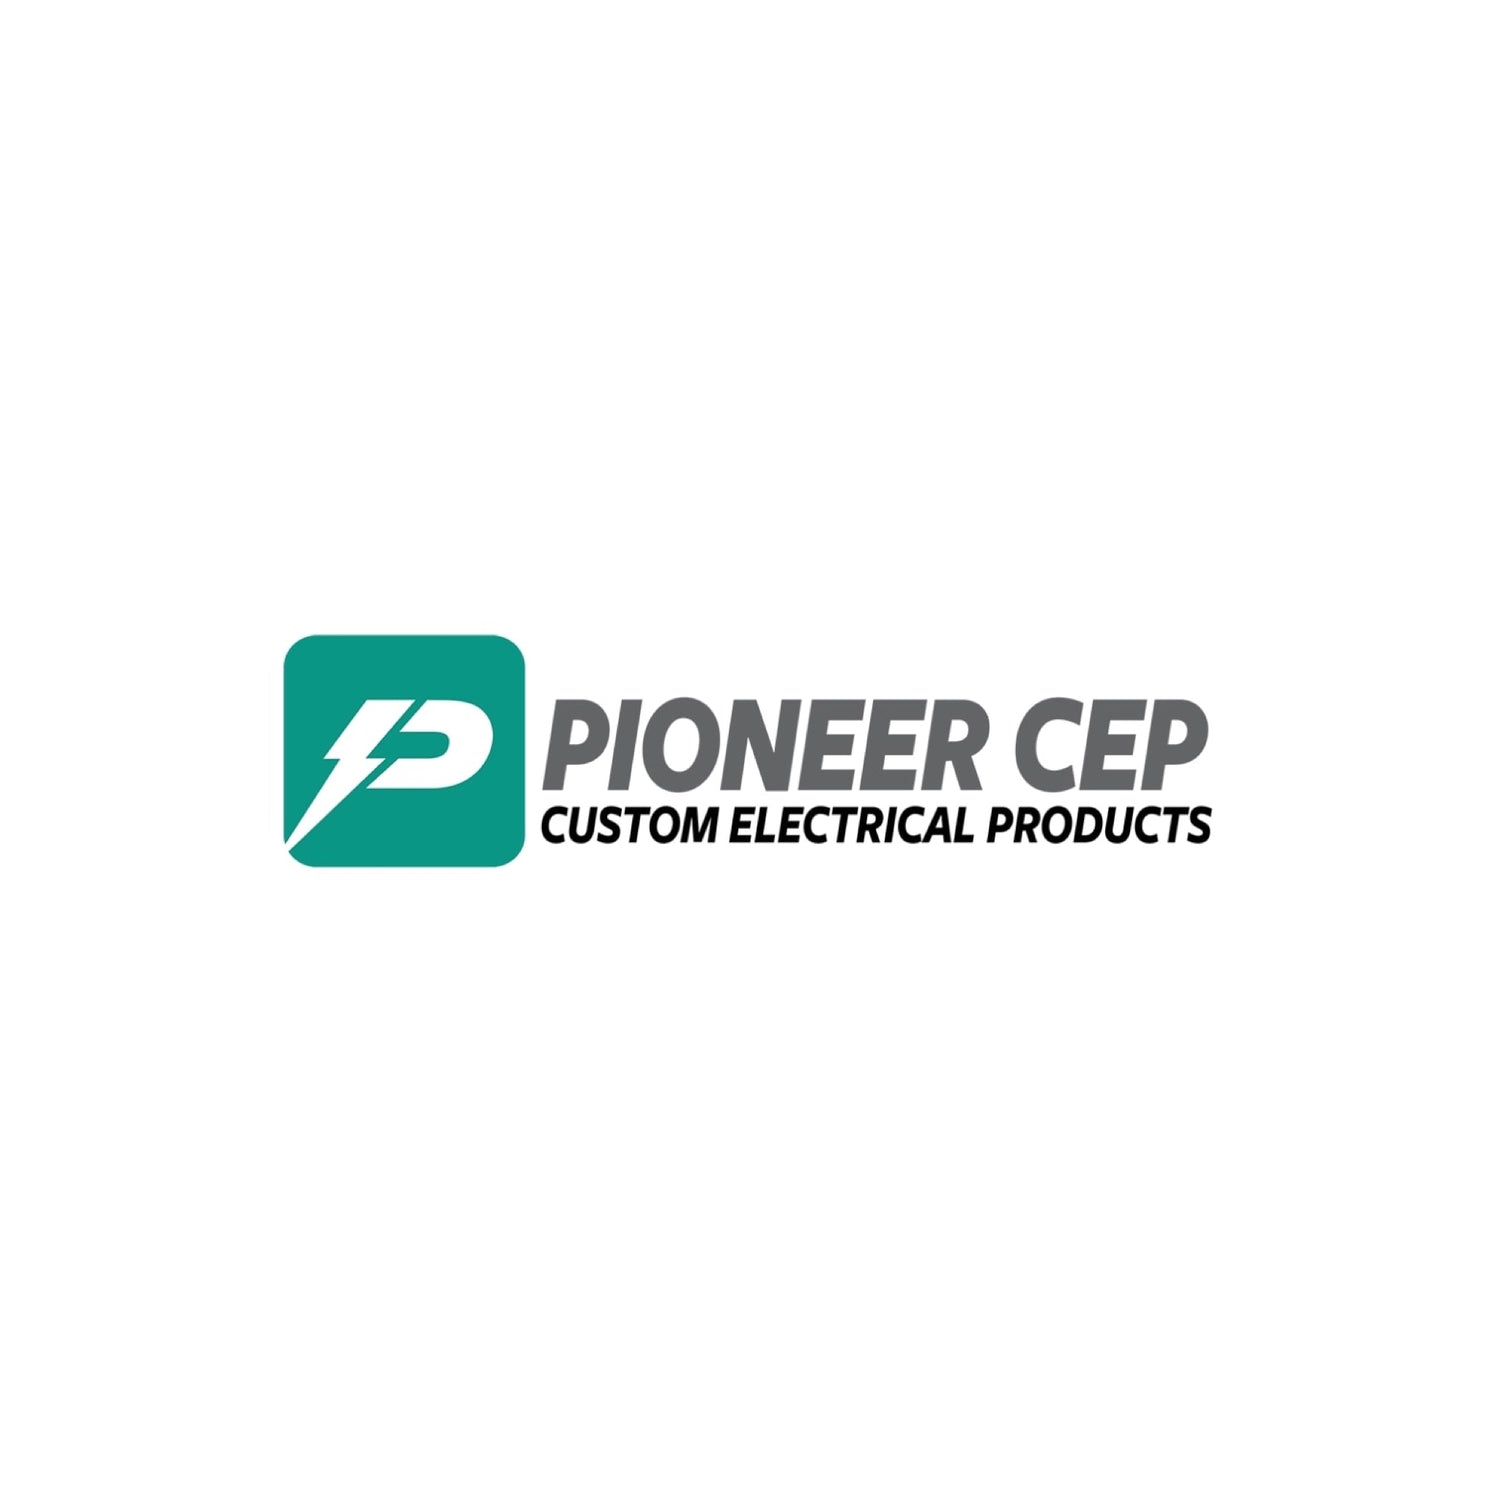 PIONEER CUSTOM ELECTRICAL PRODUCTS